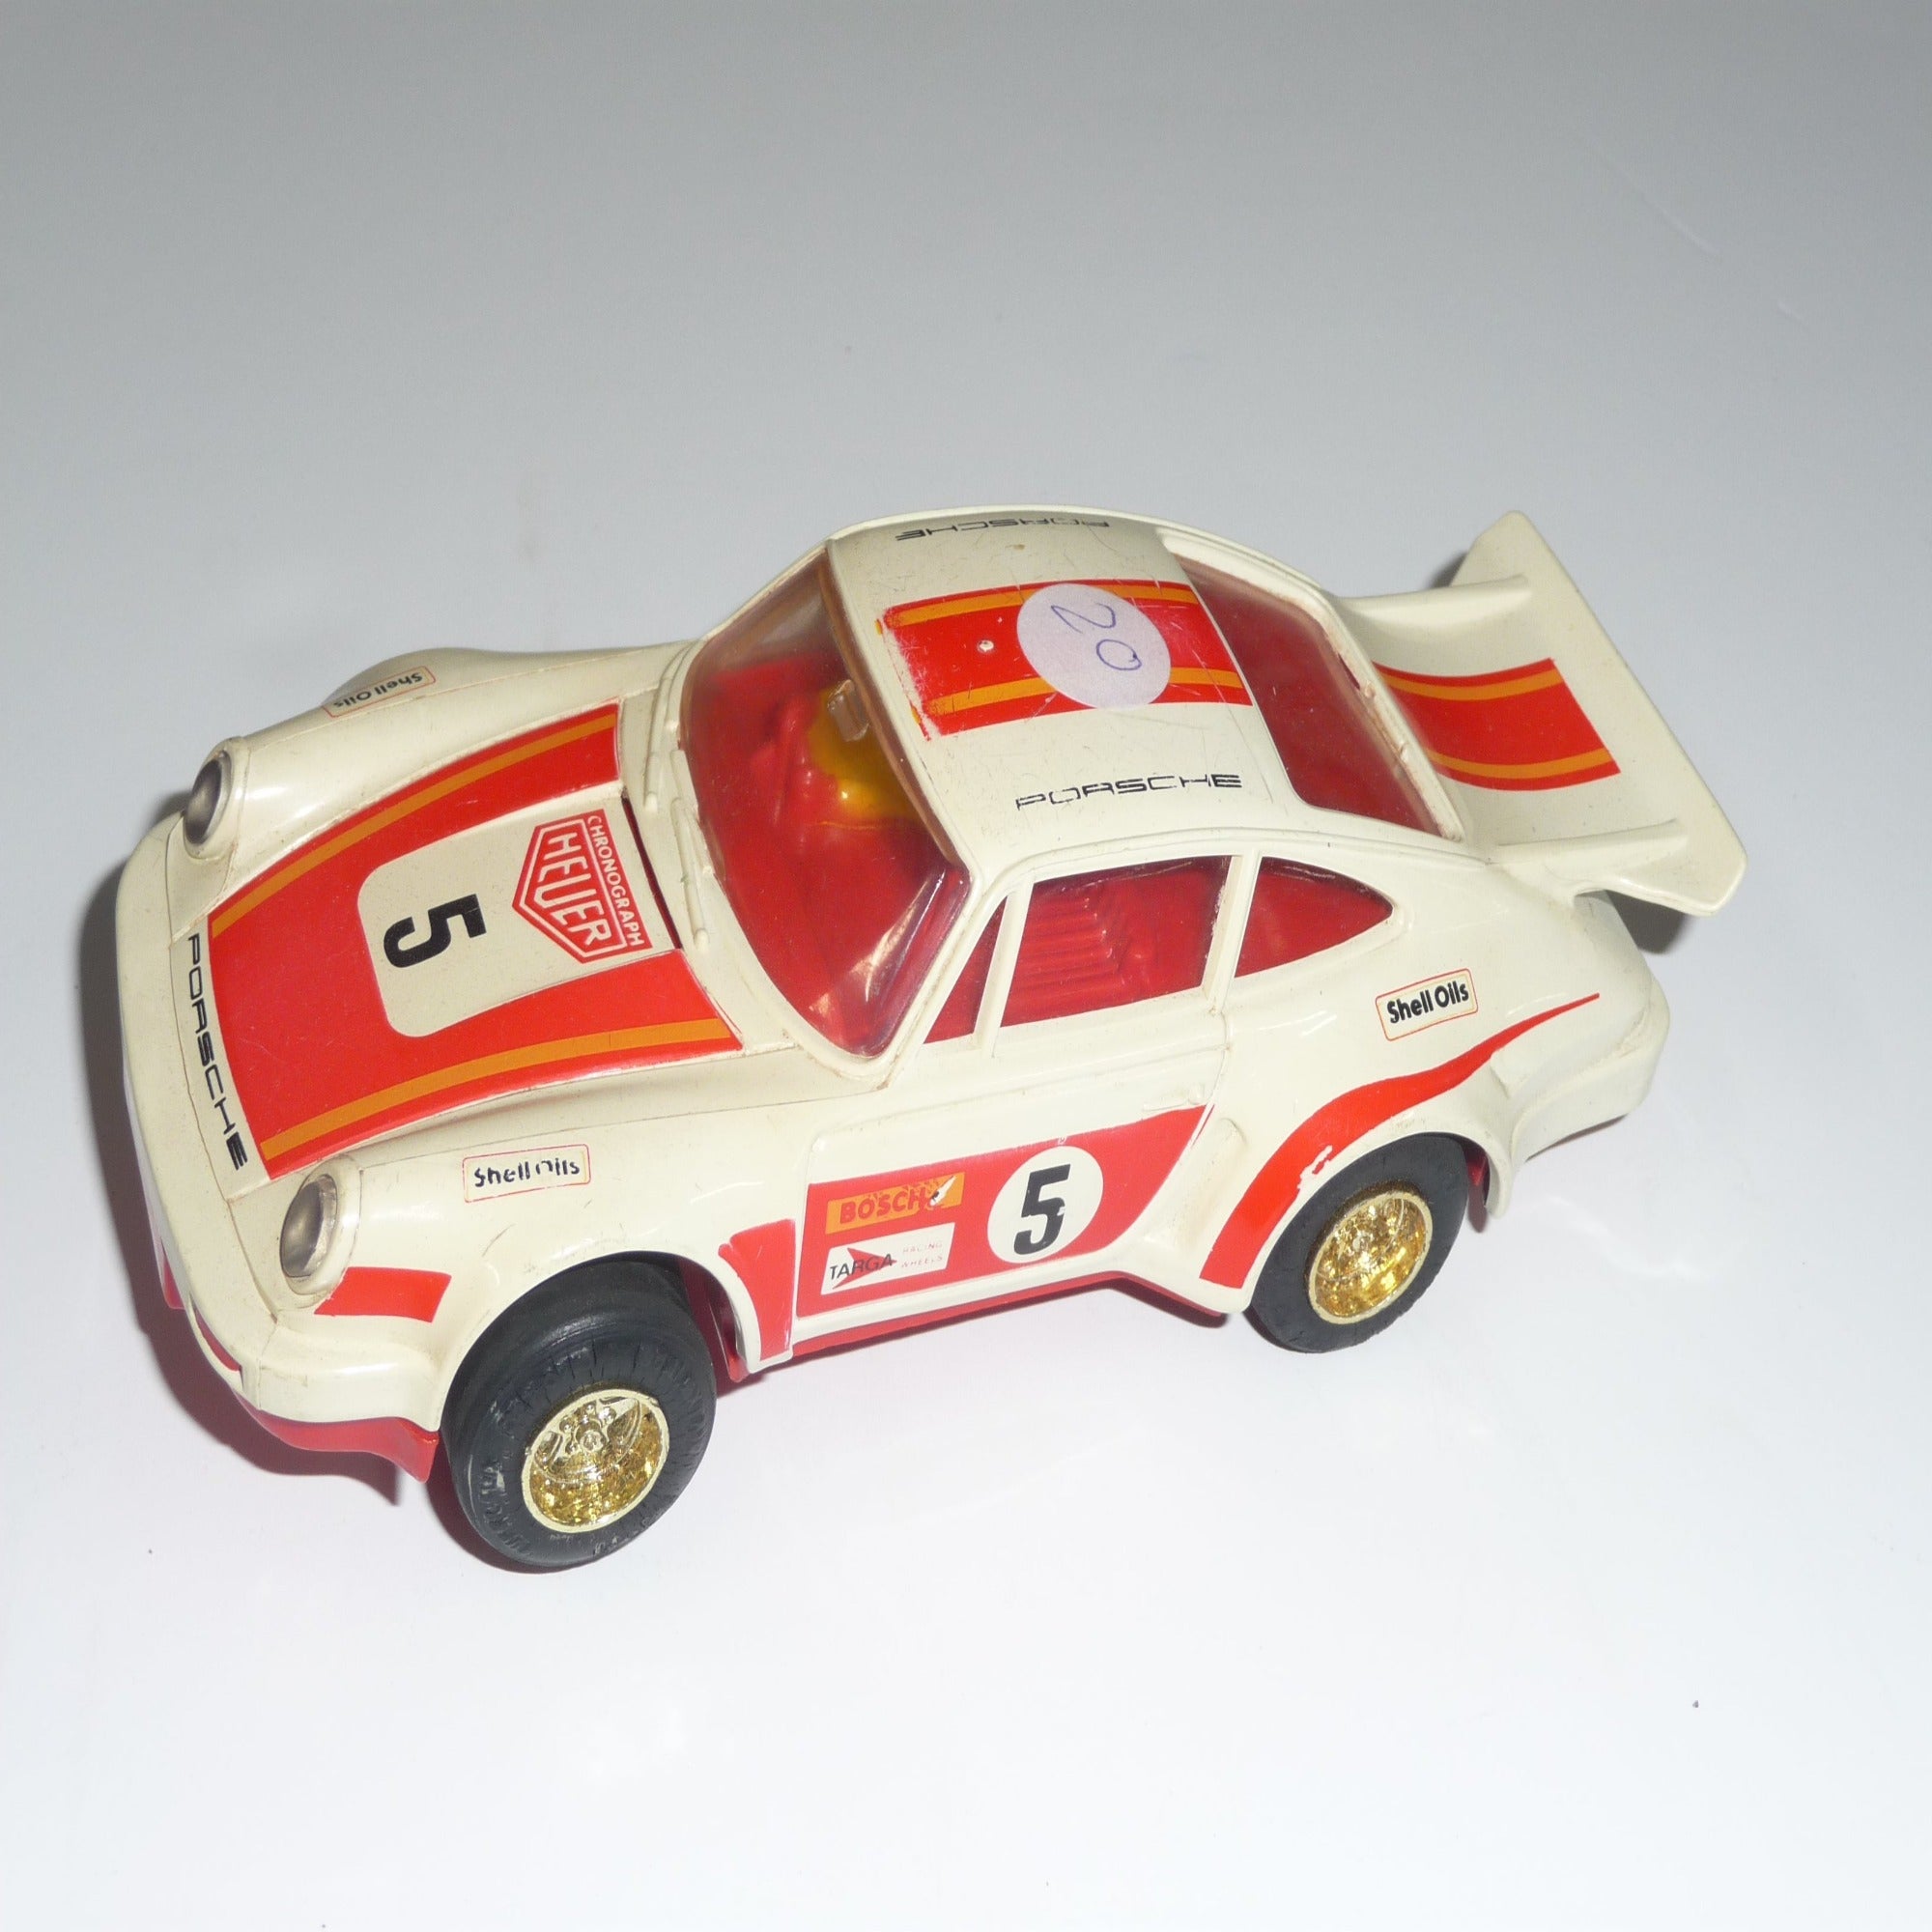 Used Scalextric Porsche C125  #5  Free Postage on Orders over $40